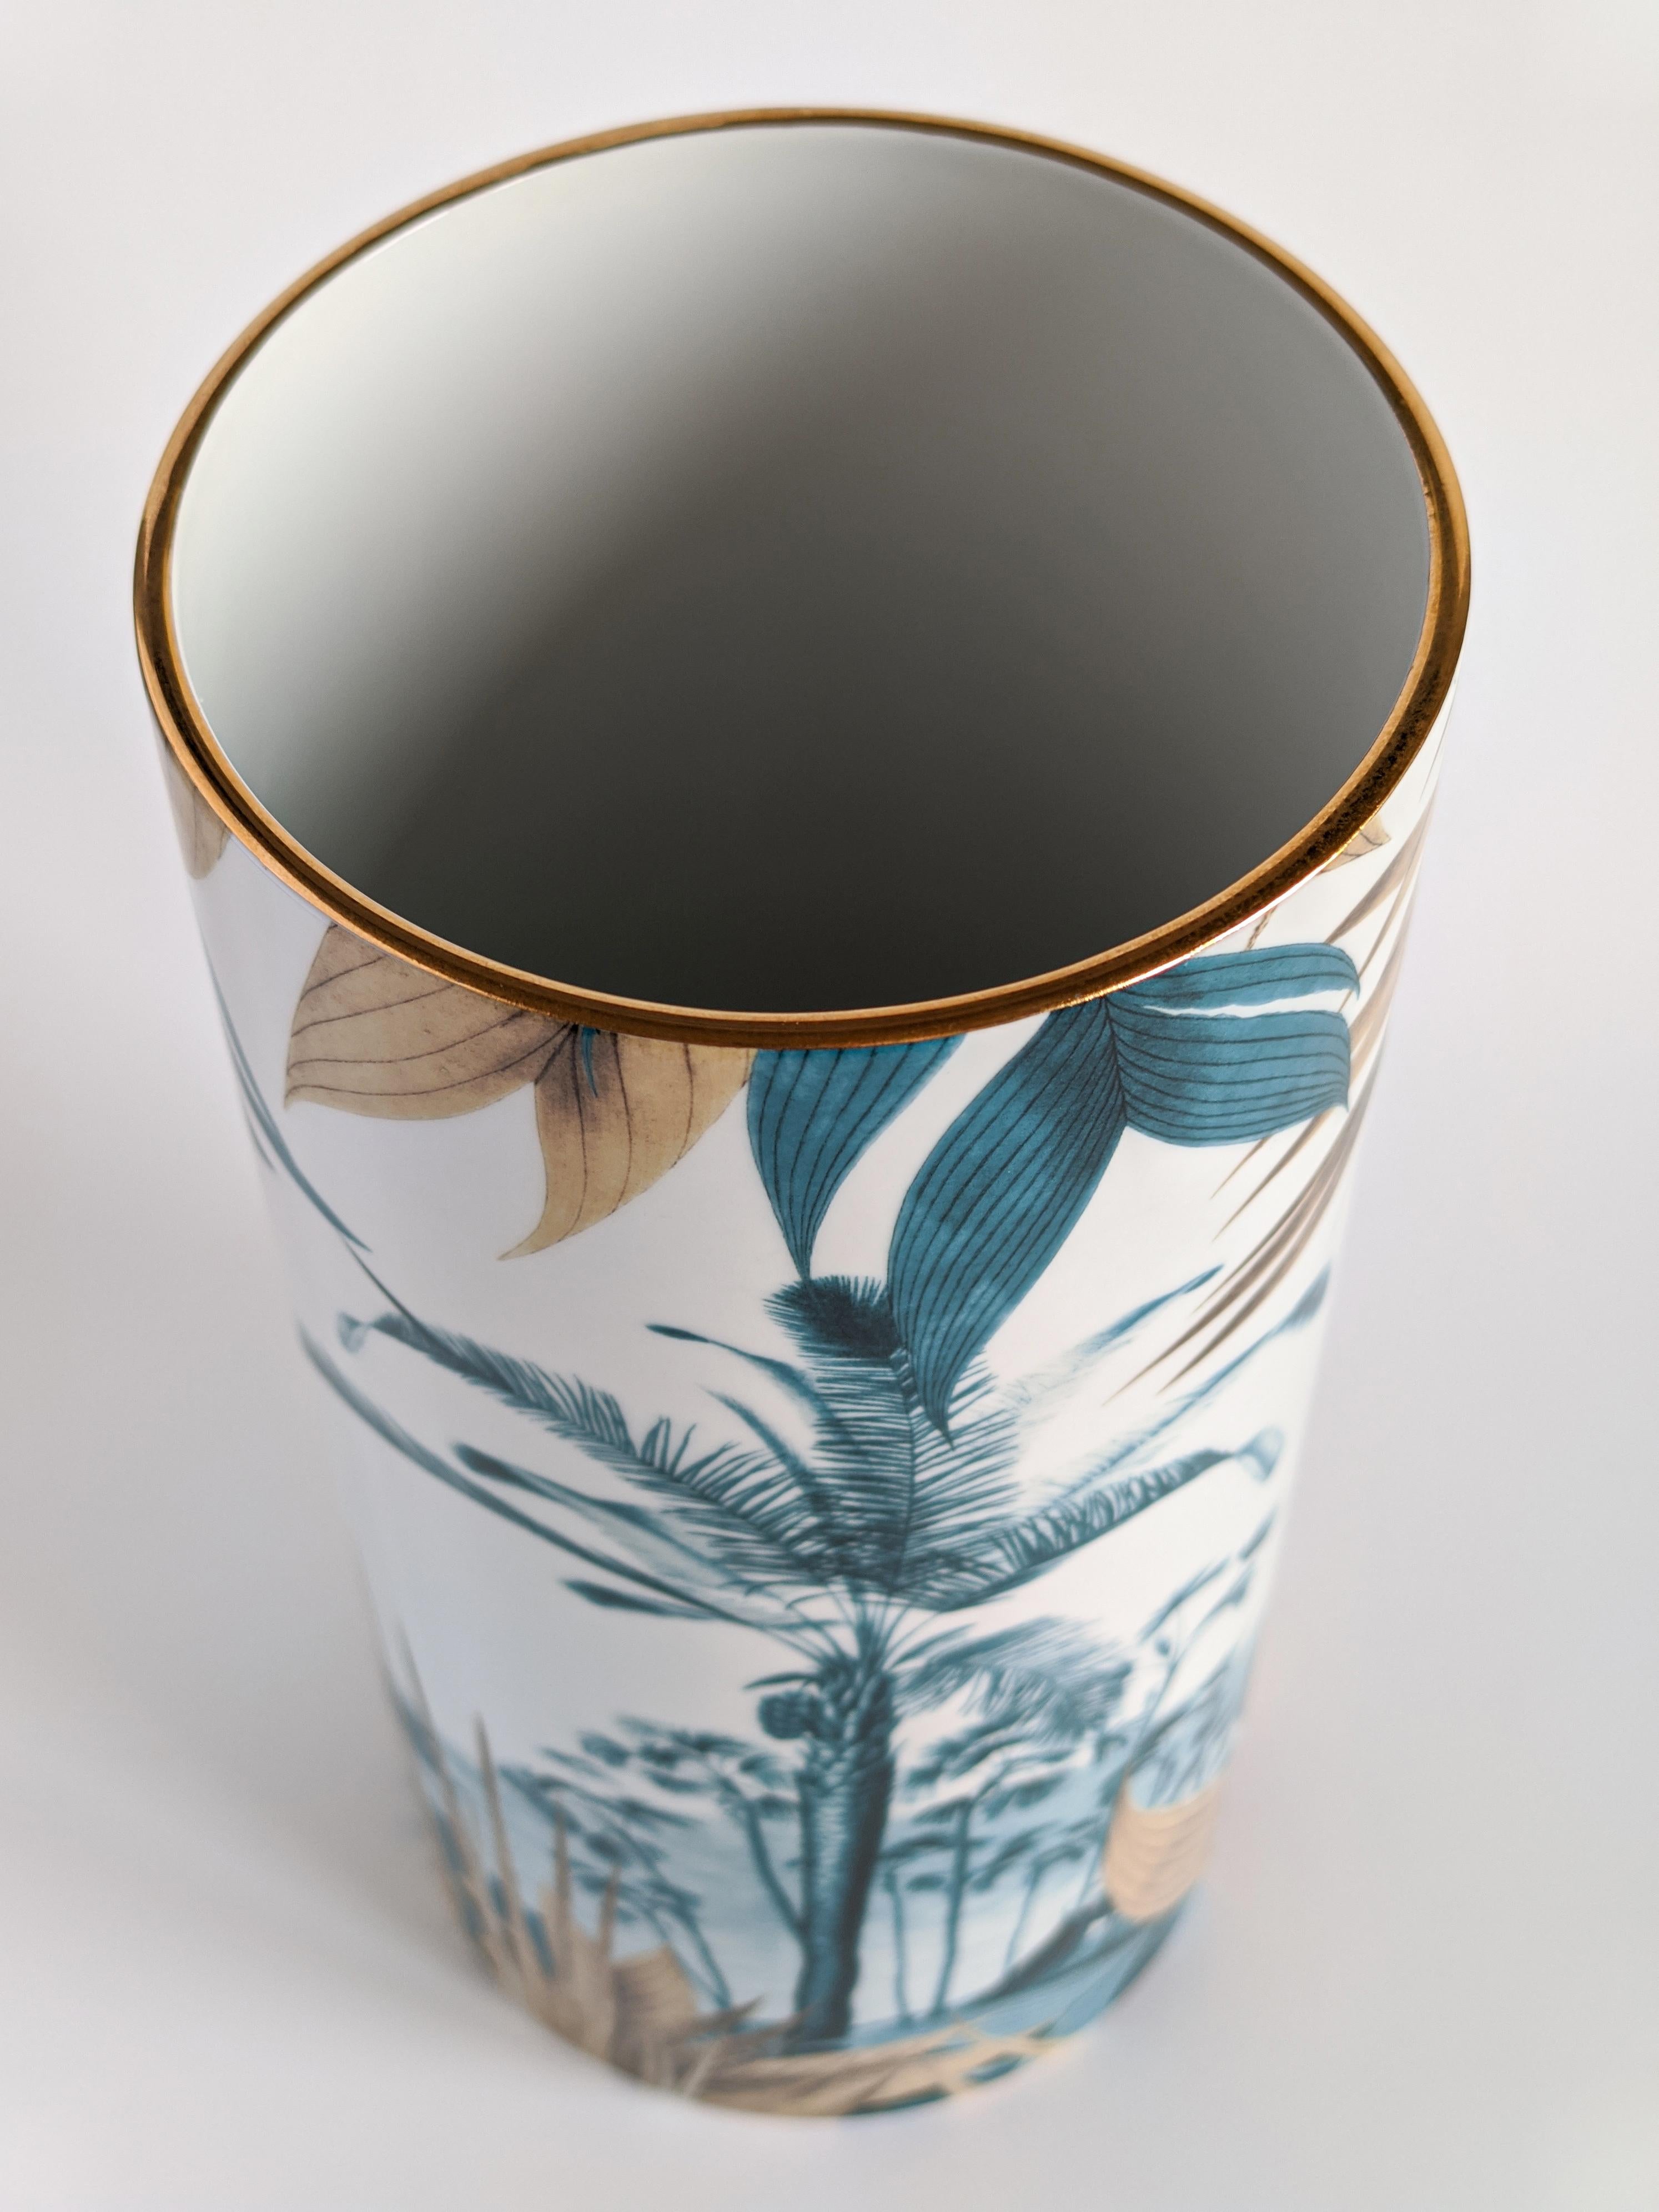 Las Palmas, Contemporary Porcelain Vase with Decorative Design by Vito Nesta In New Condition For Sale In Milano, Lombardia